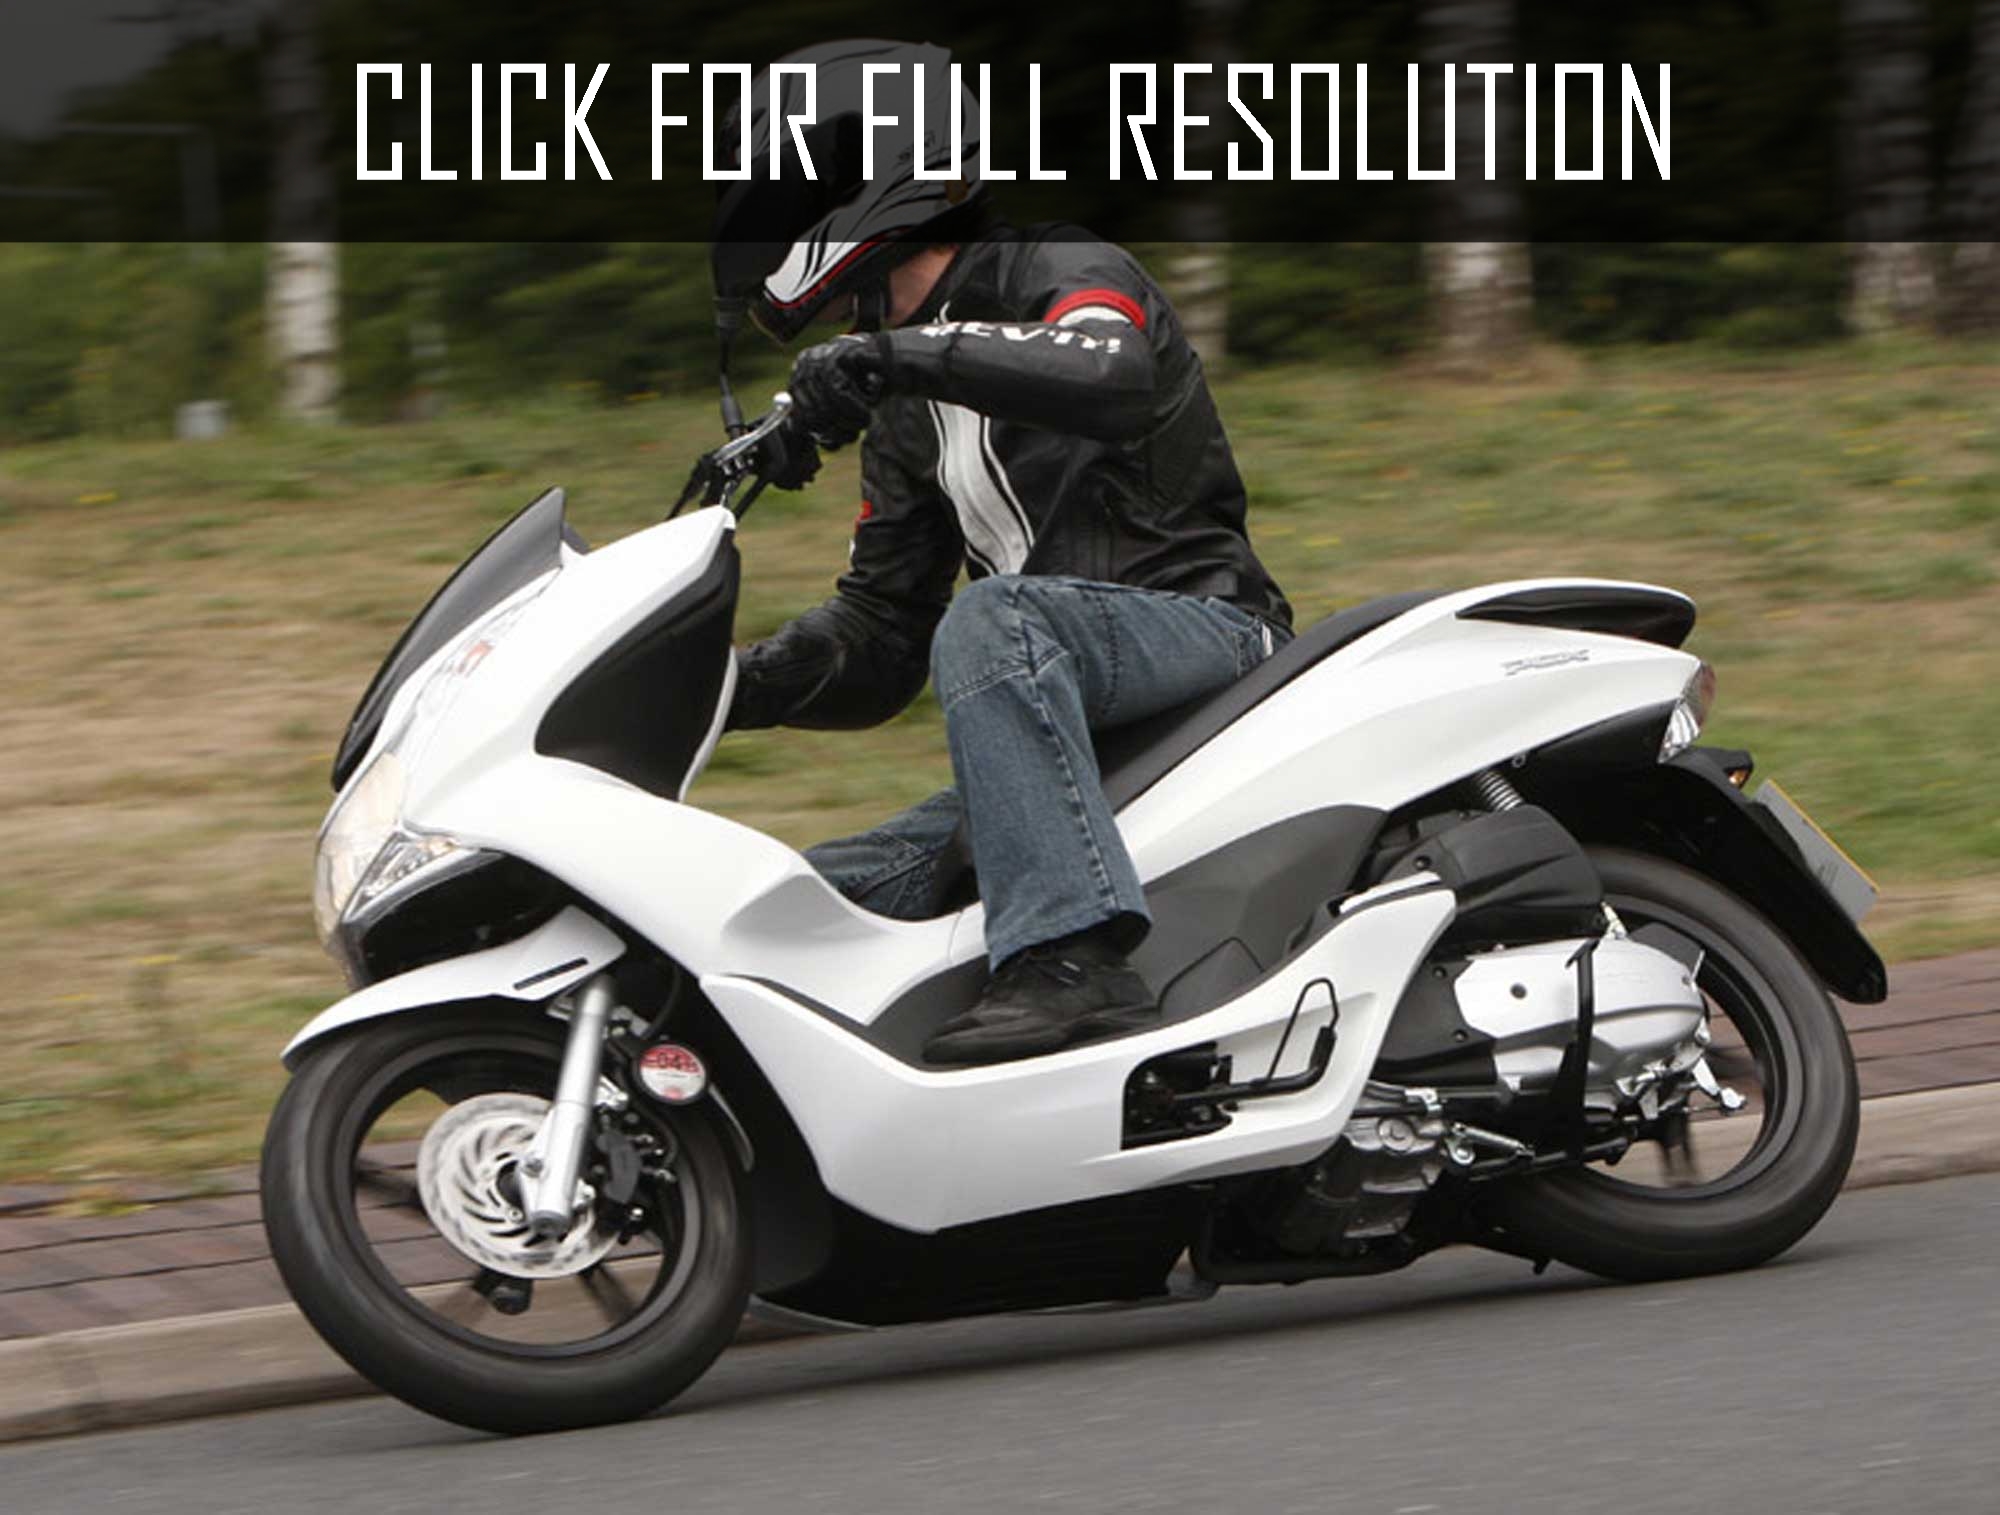 13 Honda Pcx Best Image Gallery 12 17 Share And Download